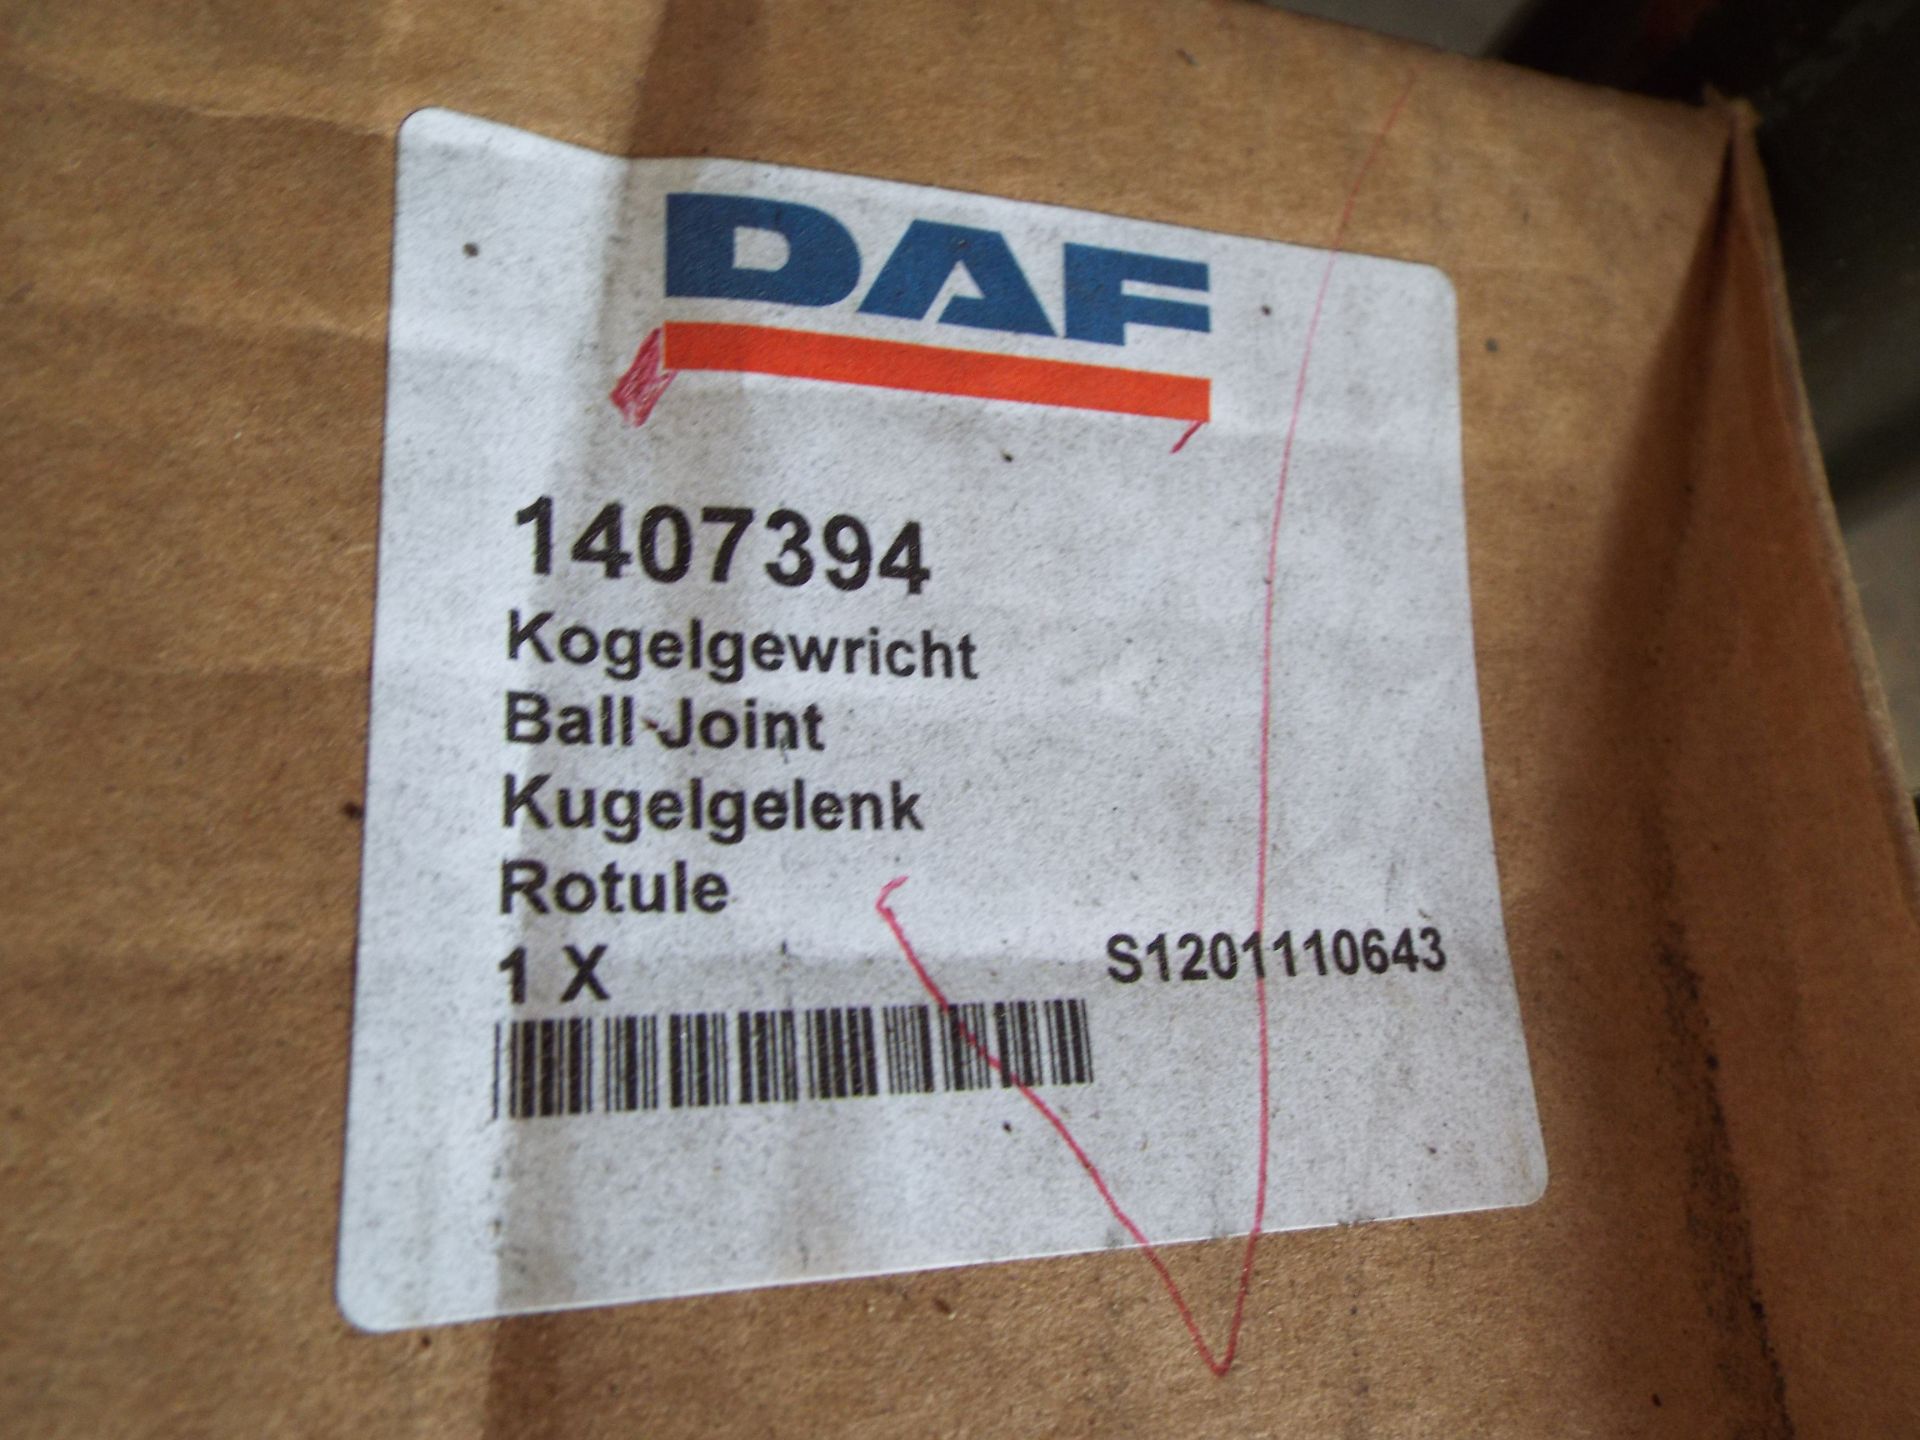 8 x Daf Ball Joint P/No 140794 - Image 3 of 3